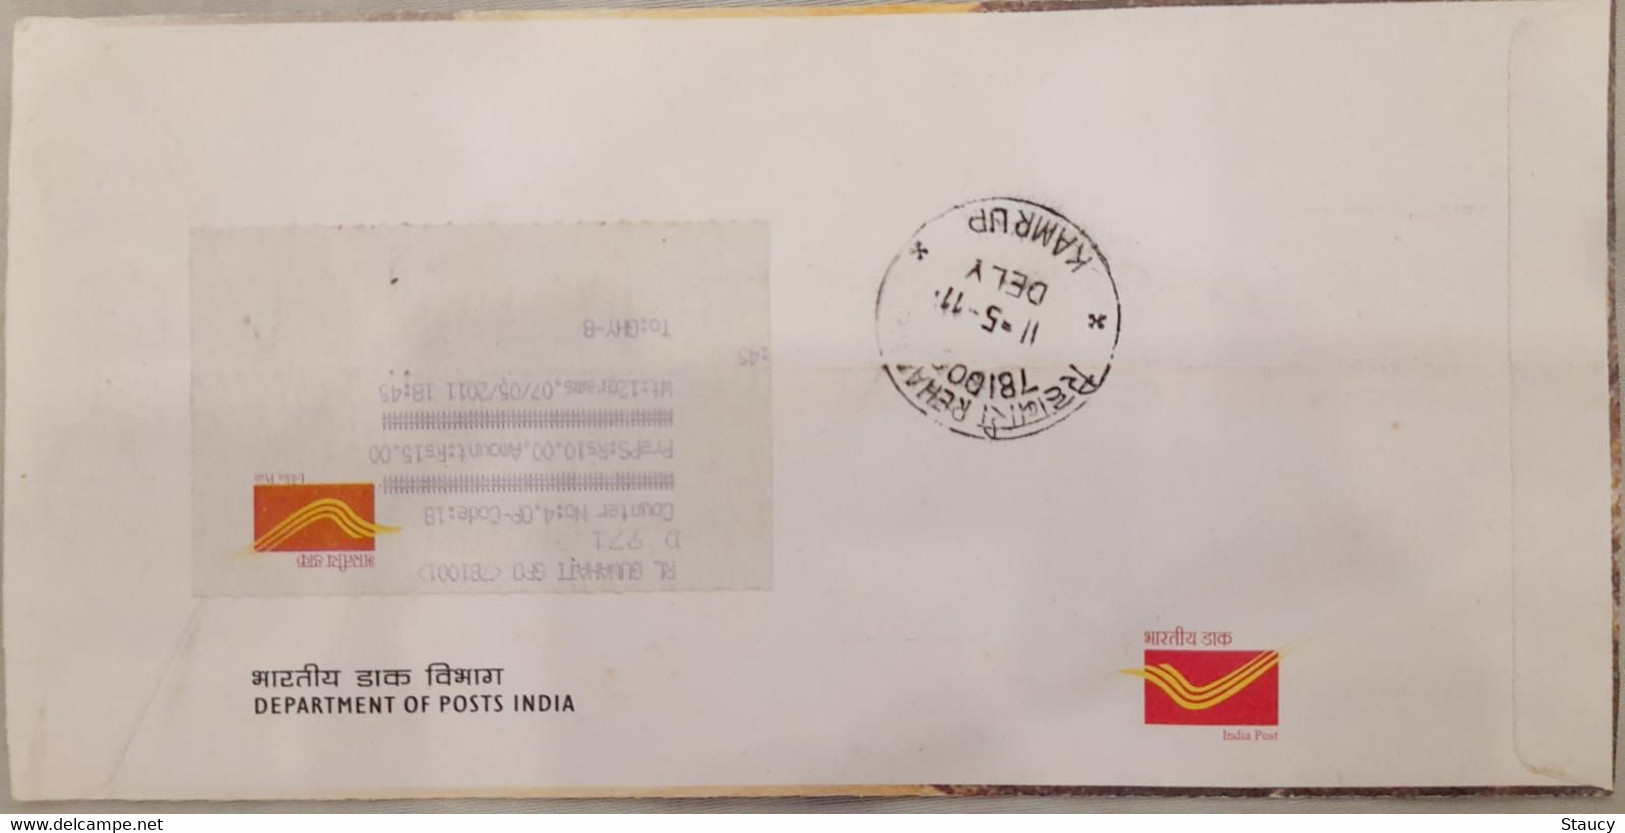 India 07.05.2011 RABINDRANATH TAGORE Miniature Sheet MS "Issue Date" Registered Speed Post First Day Cover As Per Scan - Otros & Sin Clasificación